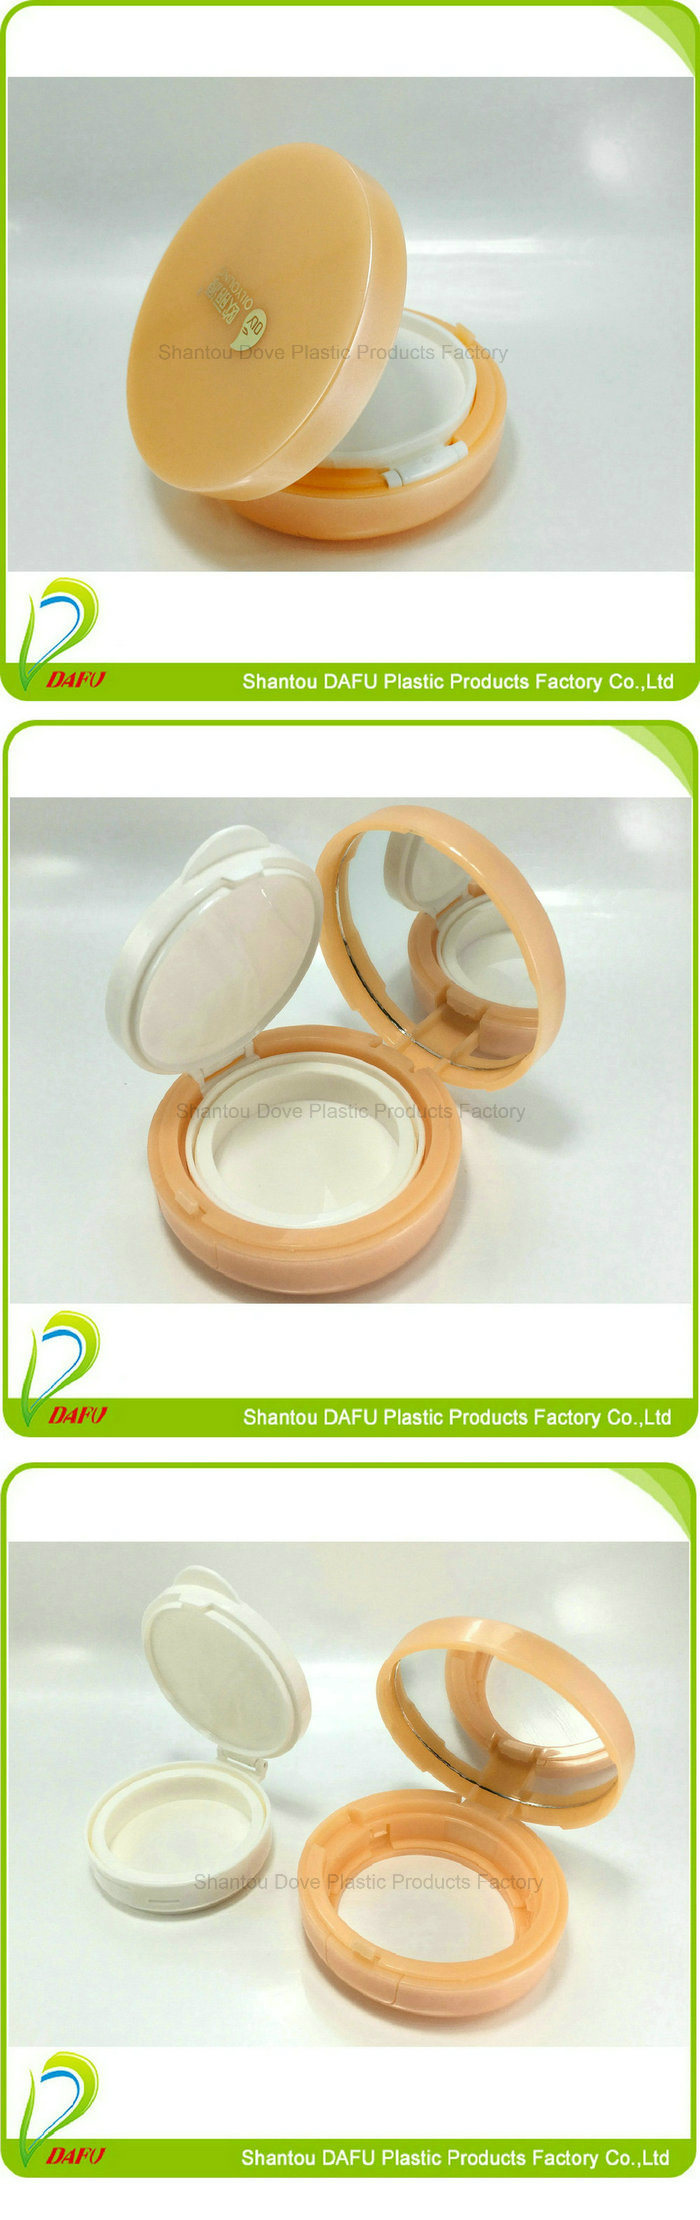 Hotsale 15g Round Compact Cosmetic Packaging